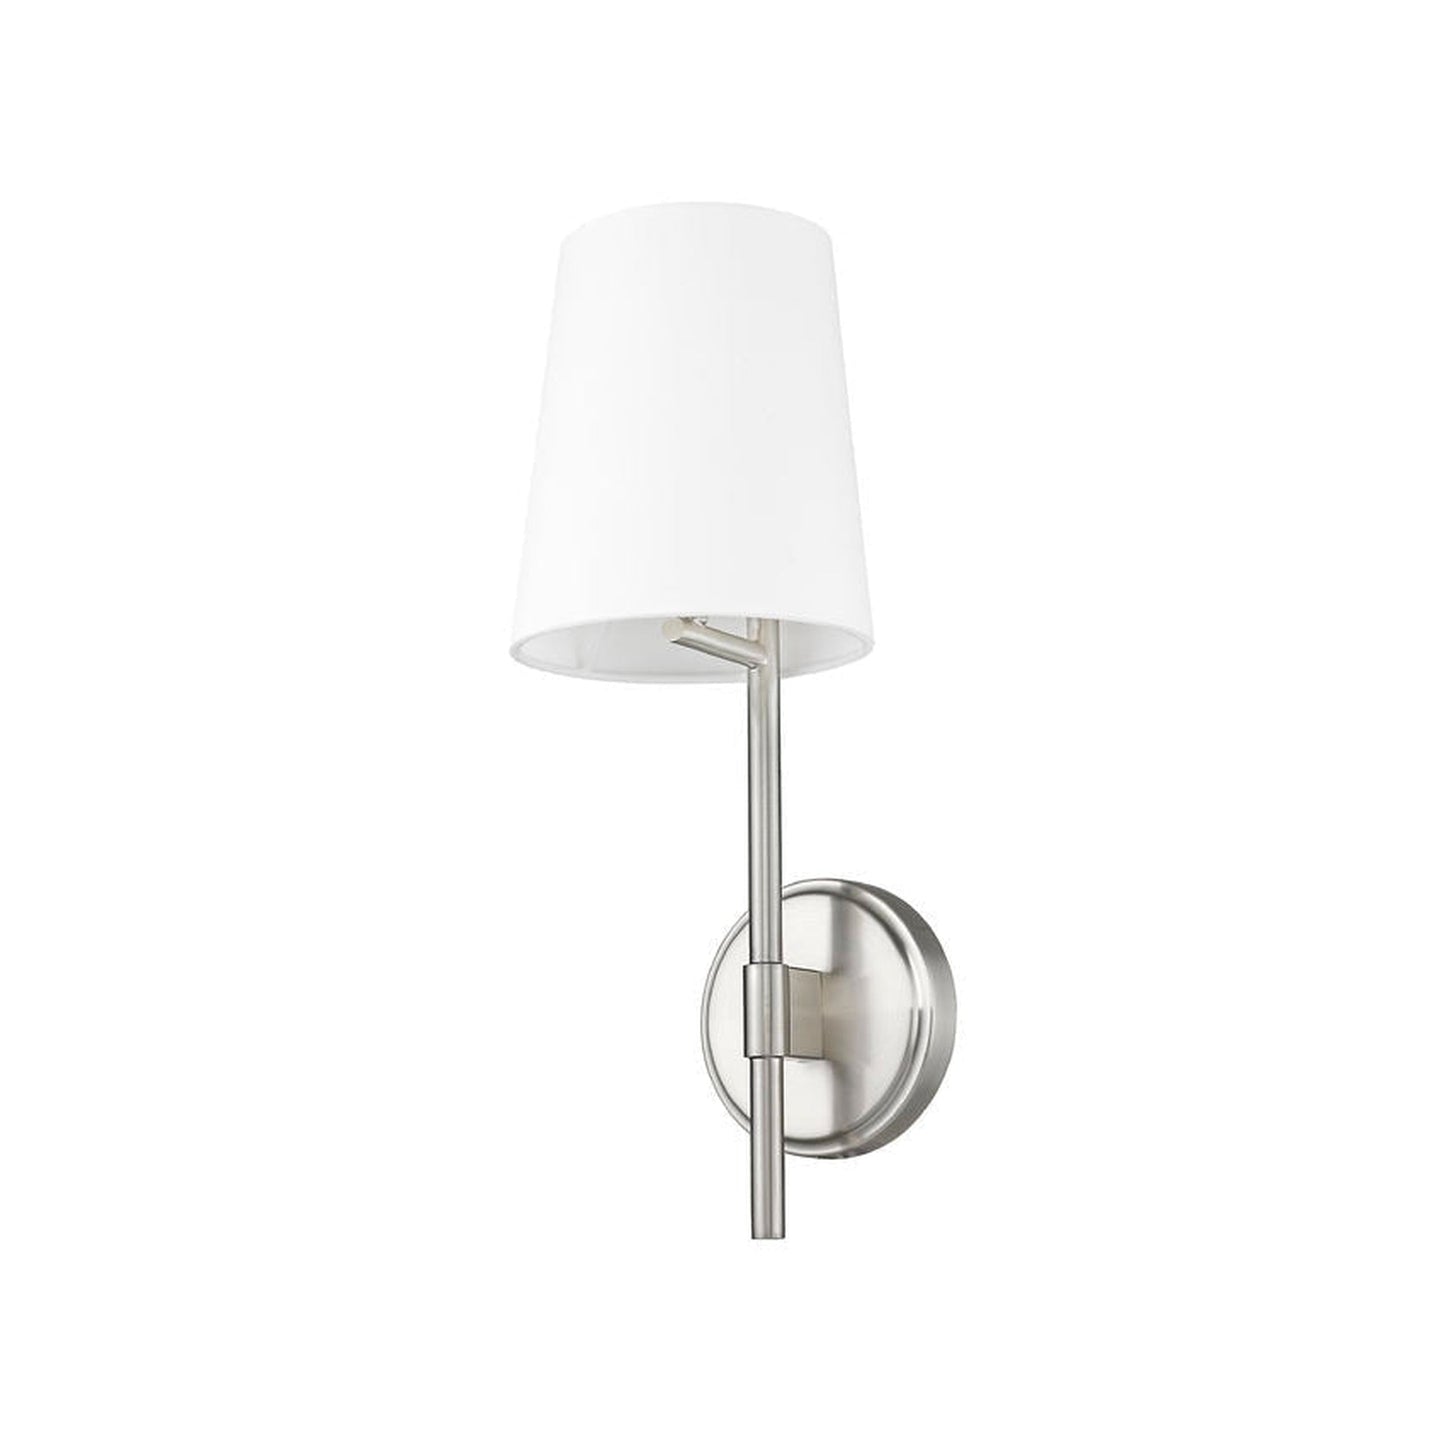 Z-Lite Winward 6" 1-Light Brushed Nickel Wall Sconce With White Fabric Shade